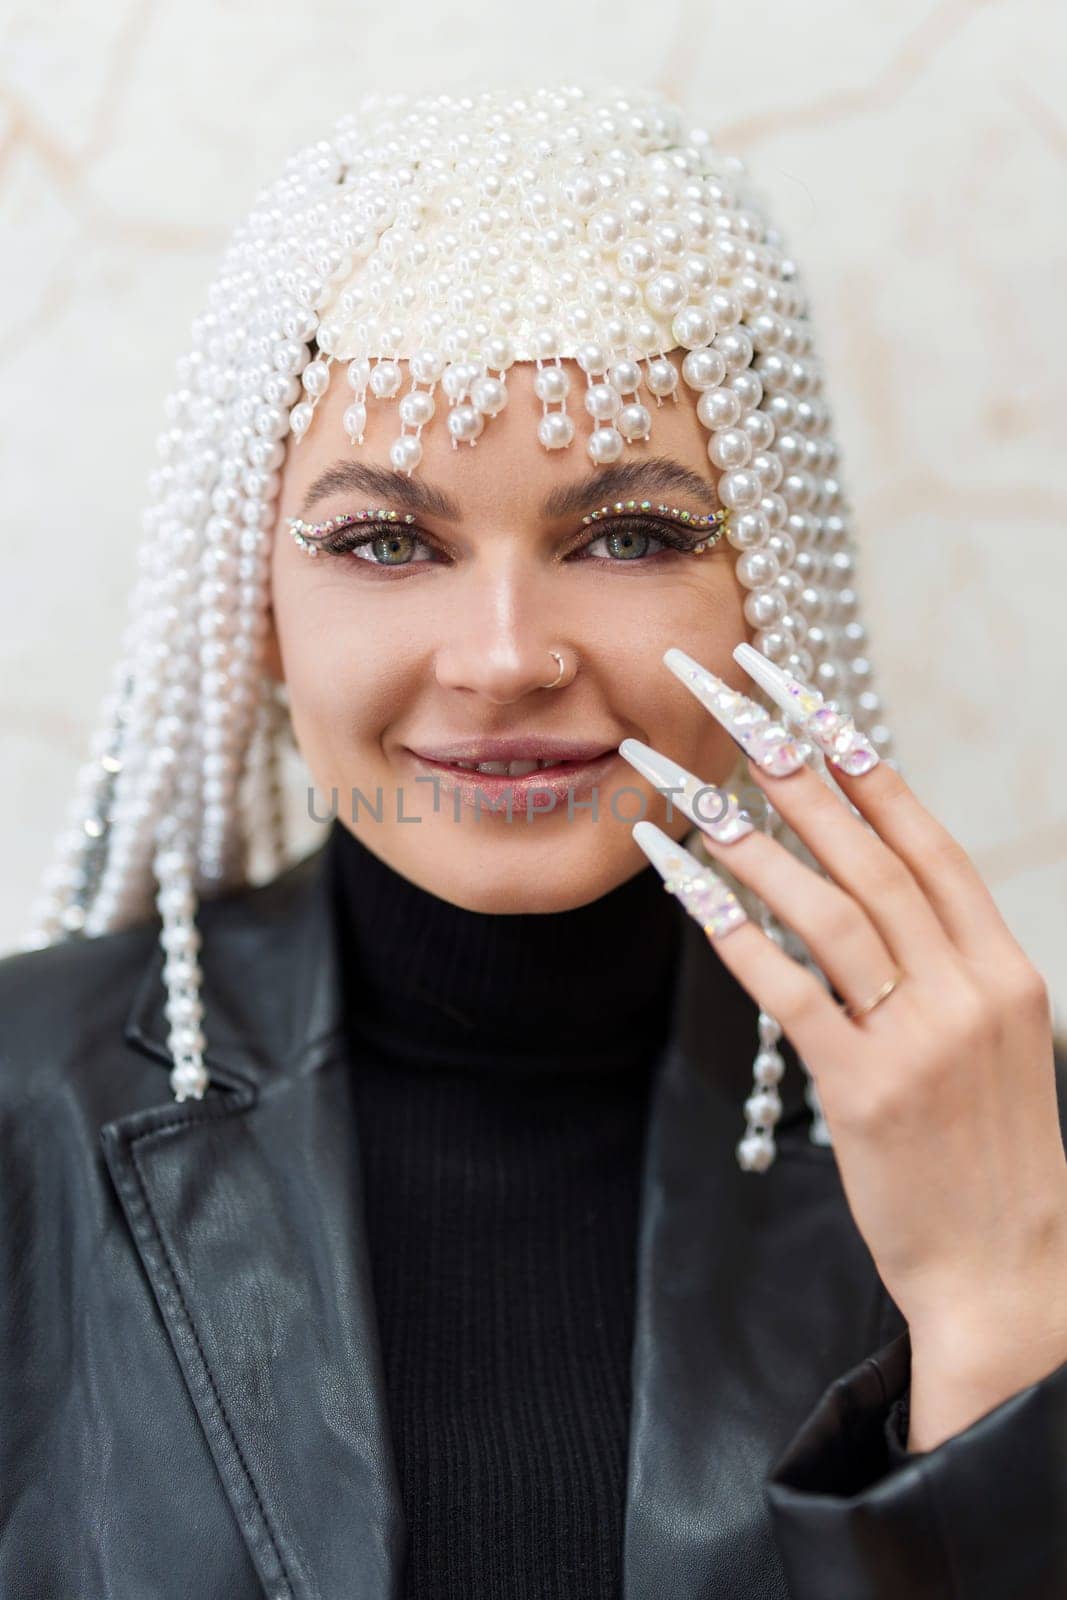 Artist with a wig of pearls, glitter and fake nails by ivanmoreno